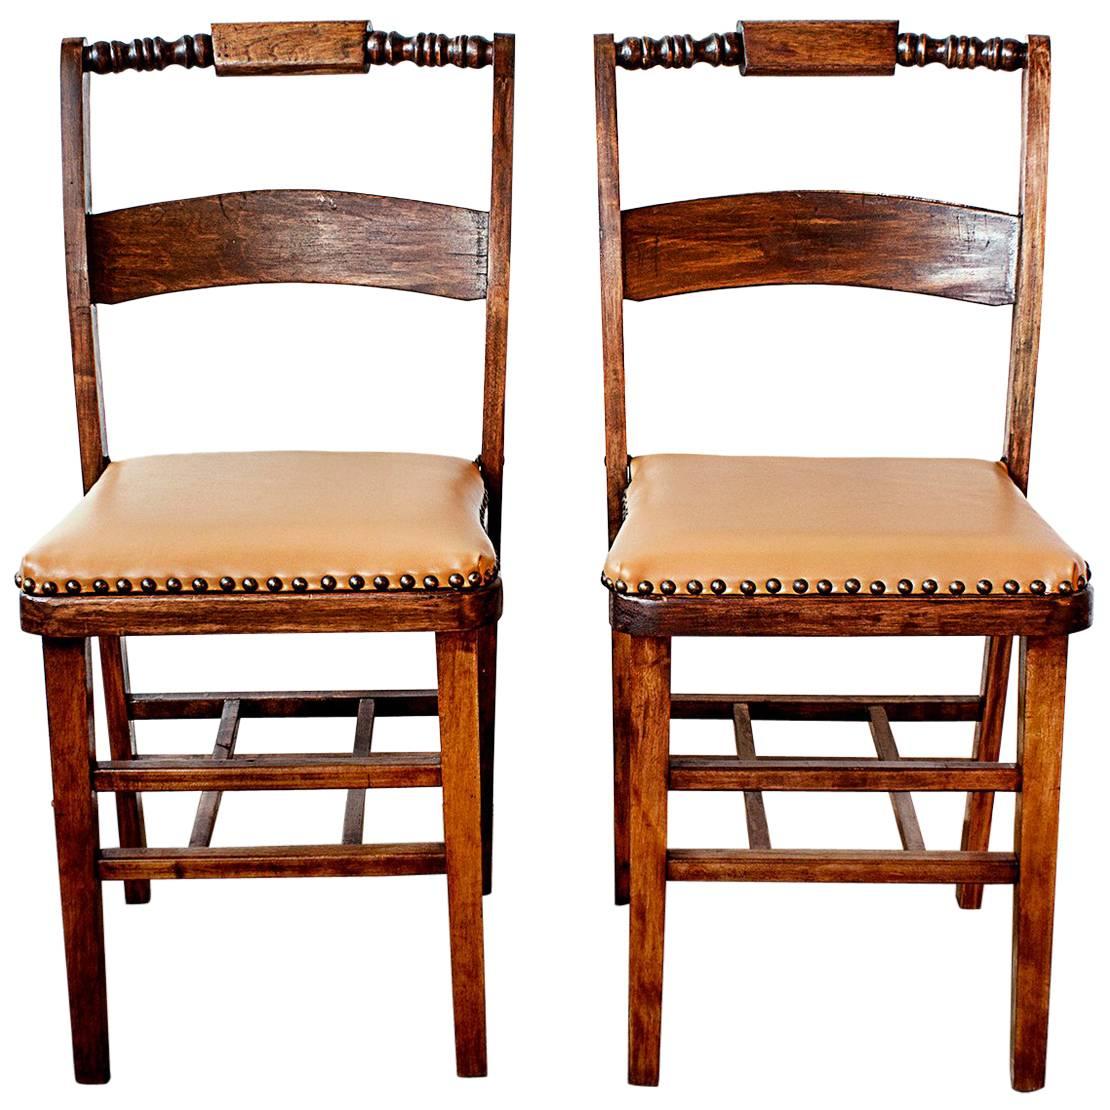 Set of Two Antique Folding Wood Chairs, circa 1930s